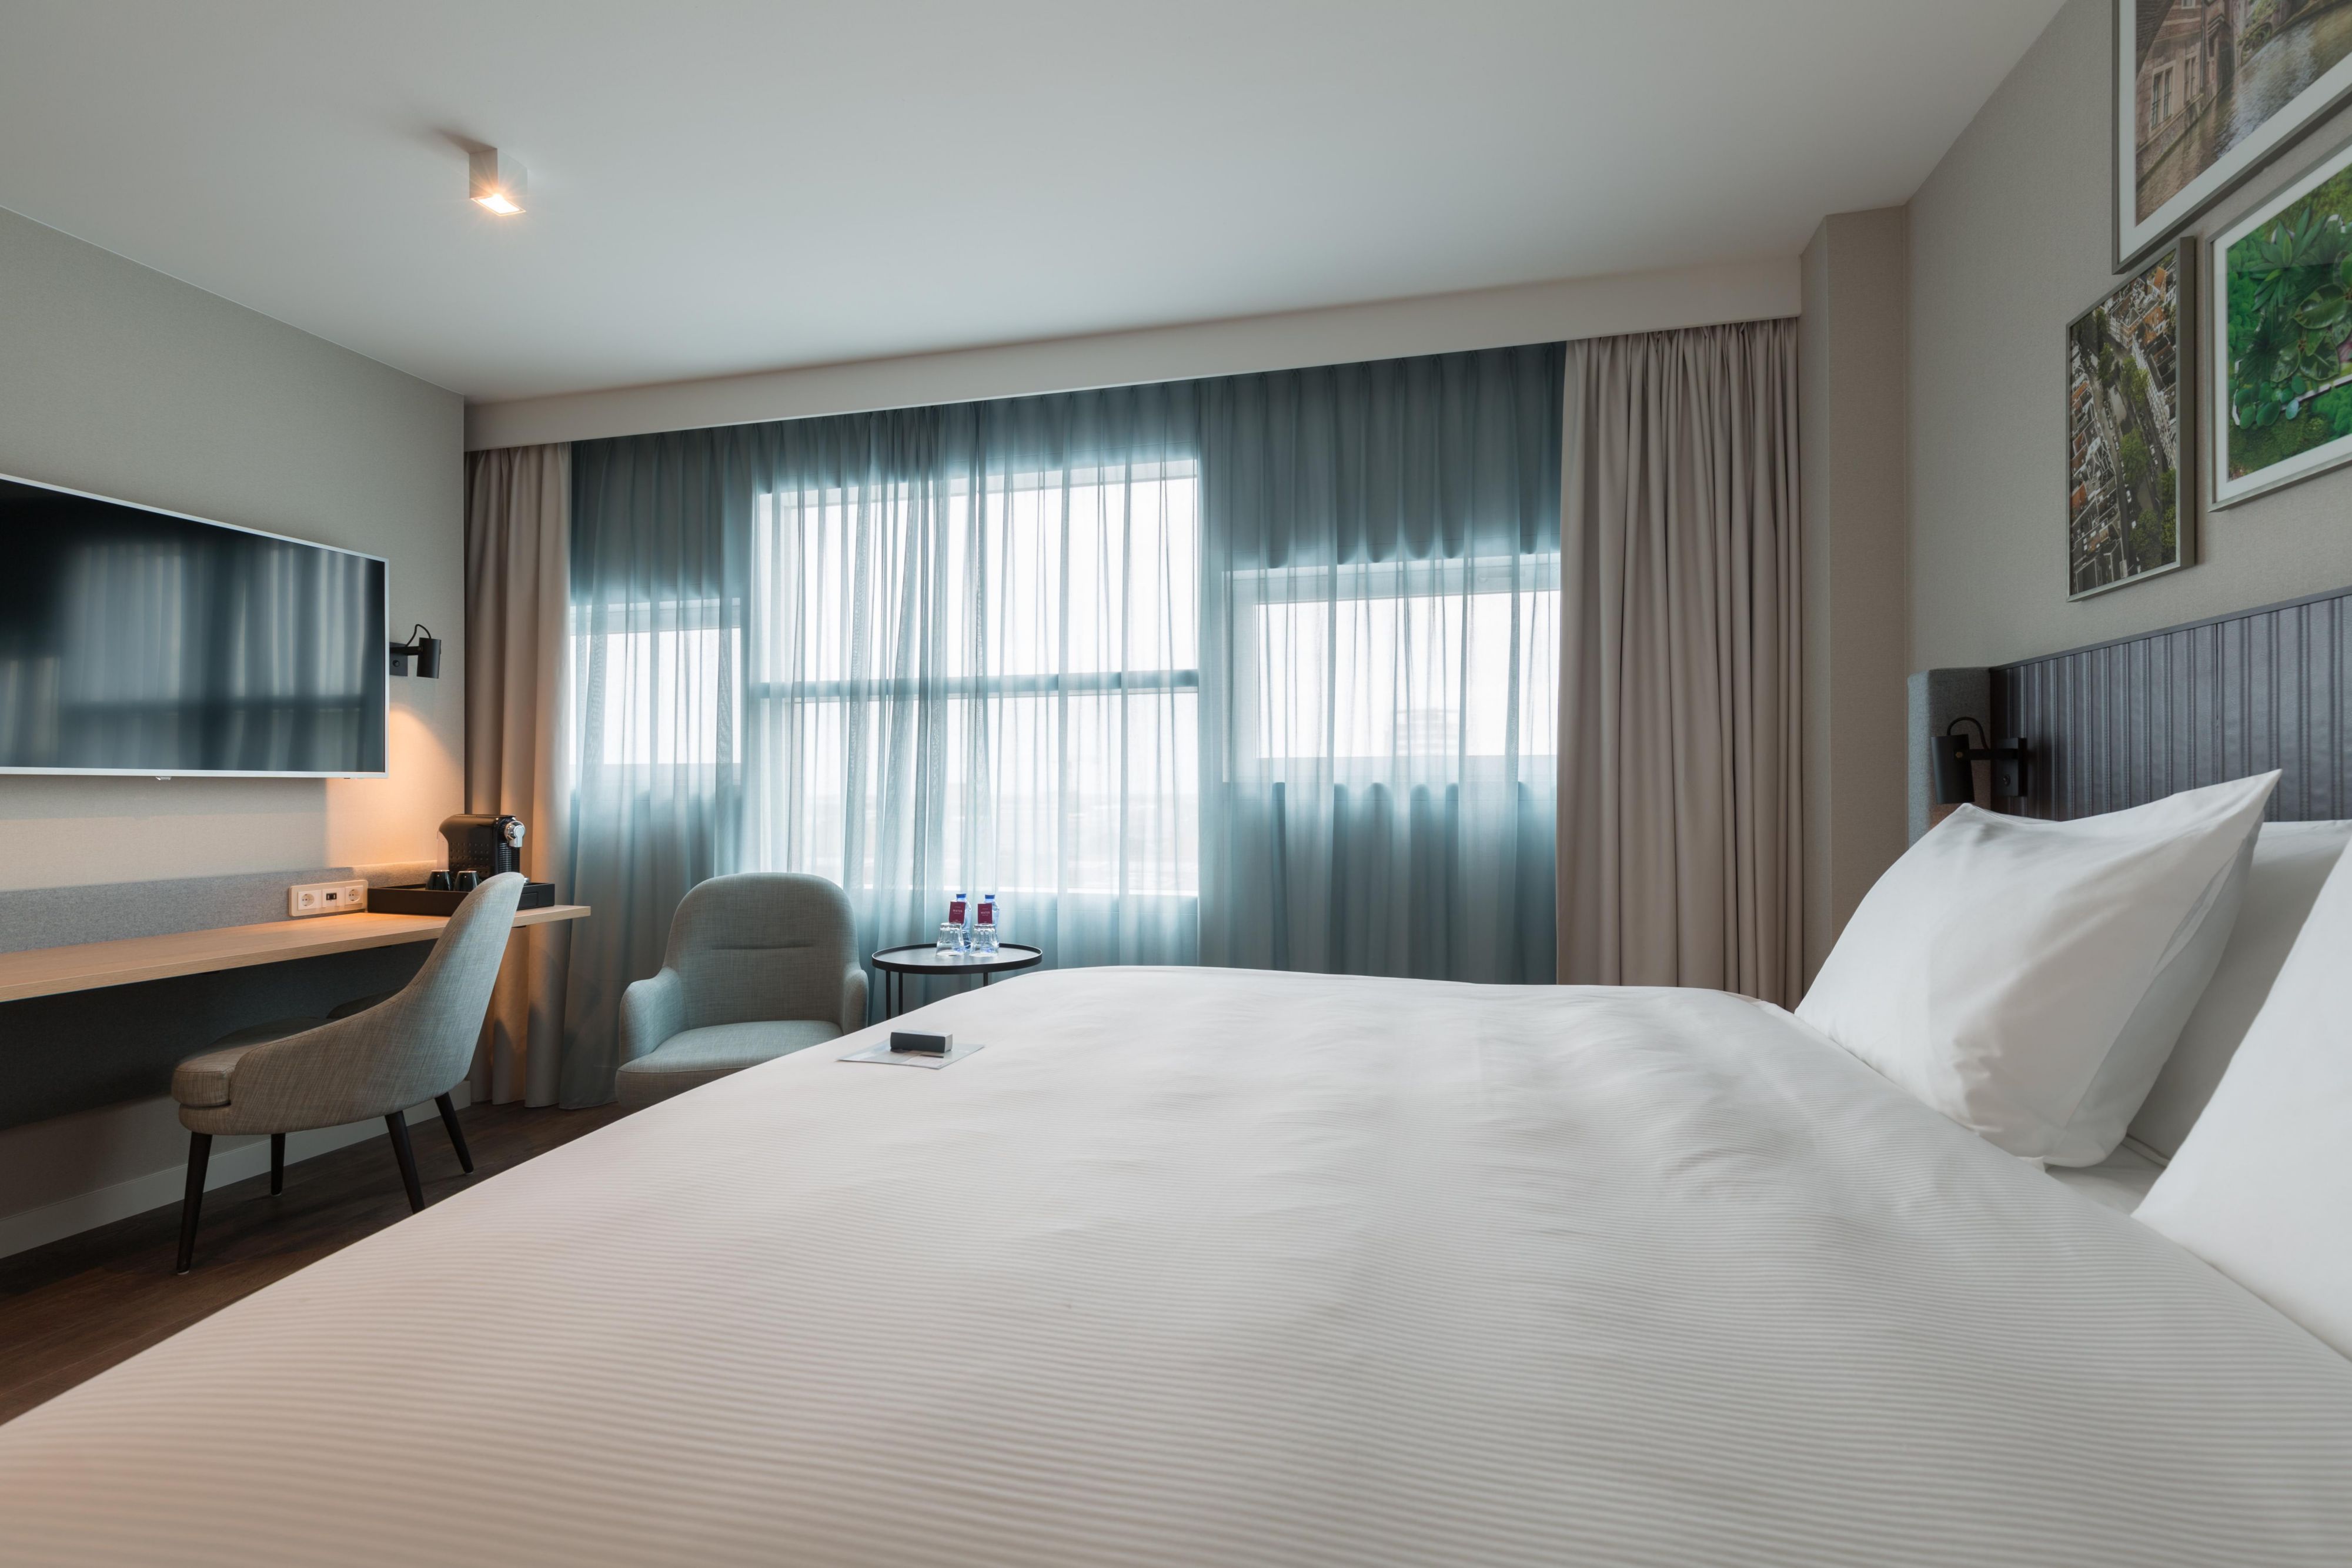 Our rooms offer a combination of comfort, connectivity&amp;flexibility